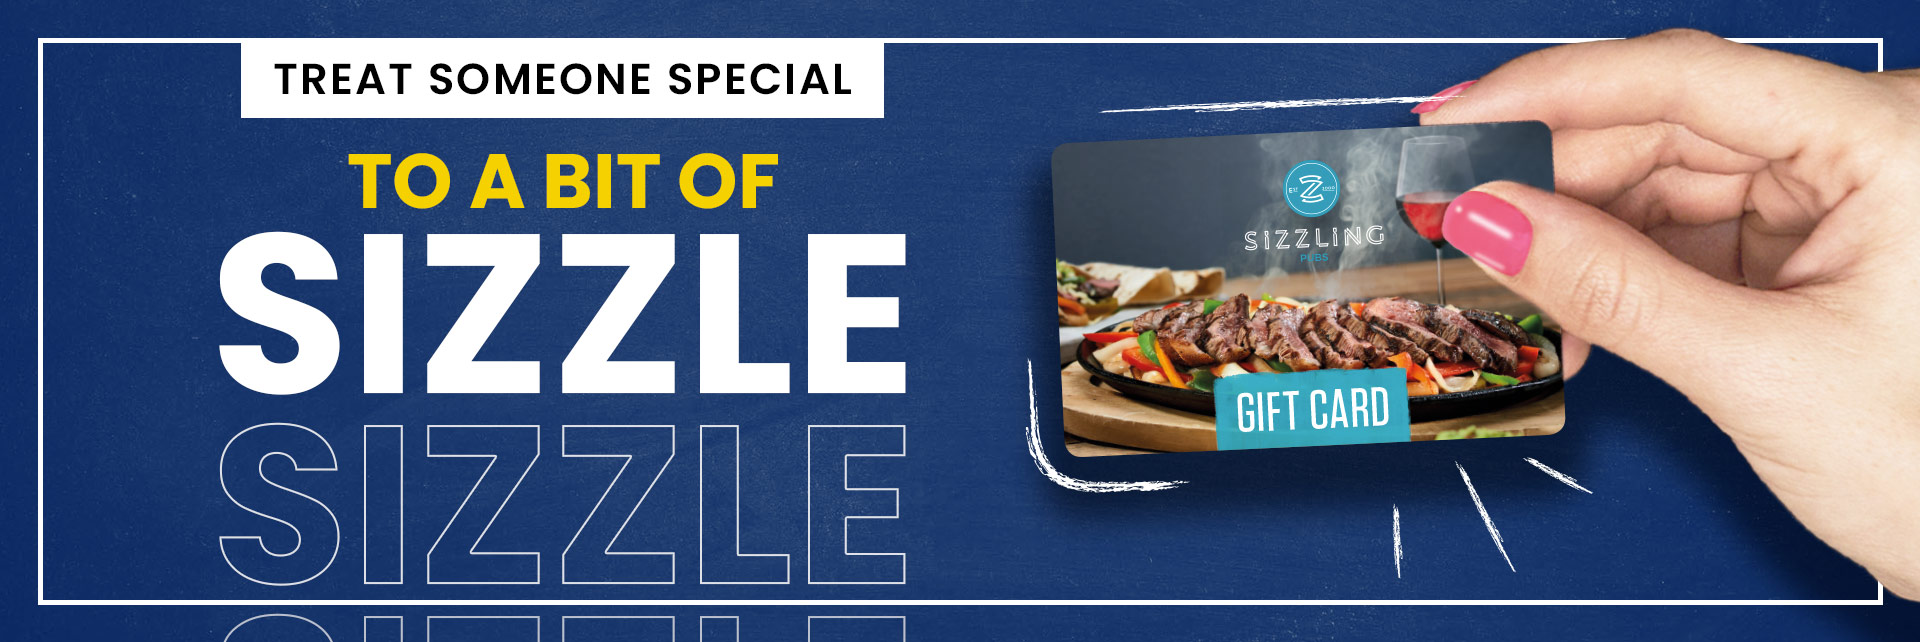 Sizzling Pubs Gift Card at The Fendrod in Swansea